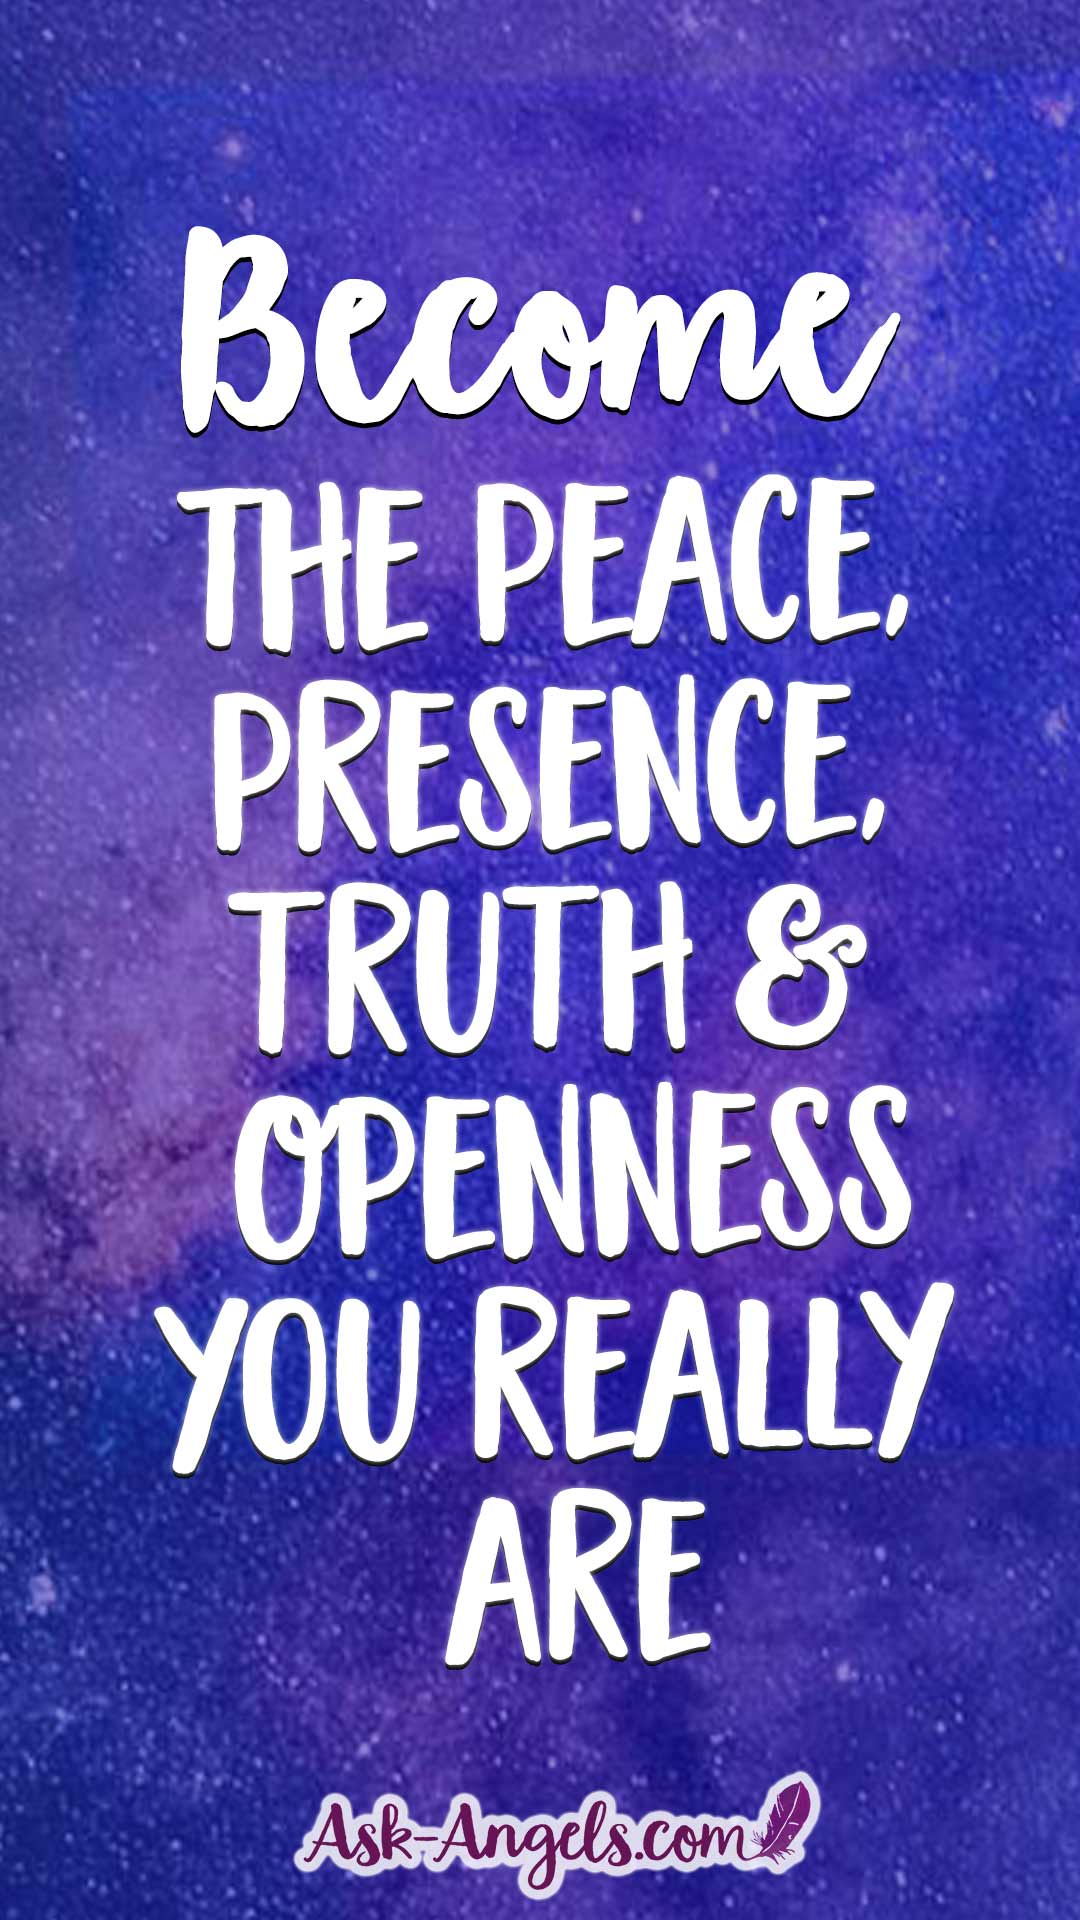 Become the peace, presence, truth and openness you really are. What you seek is seeking you.